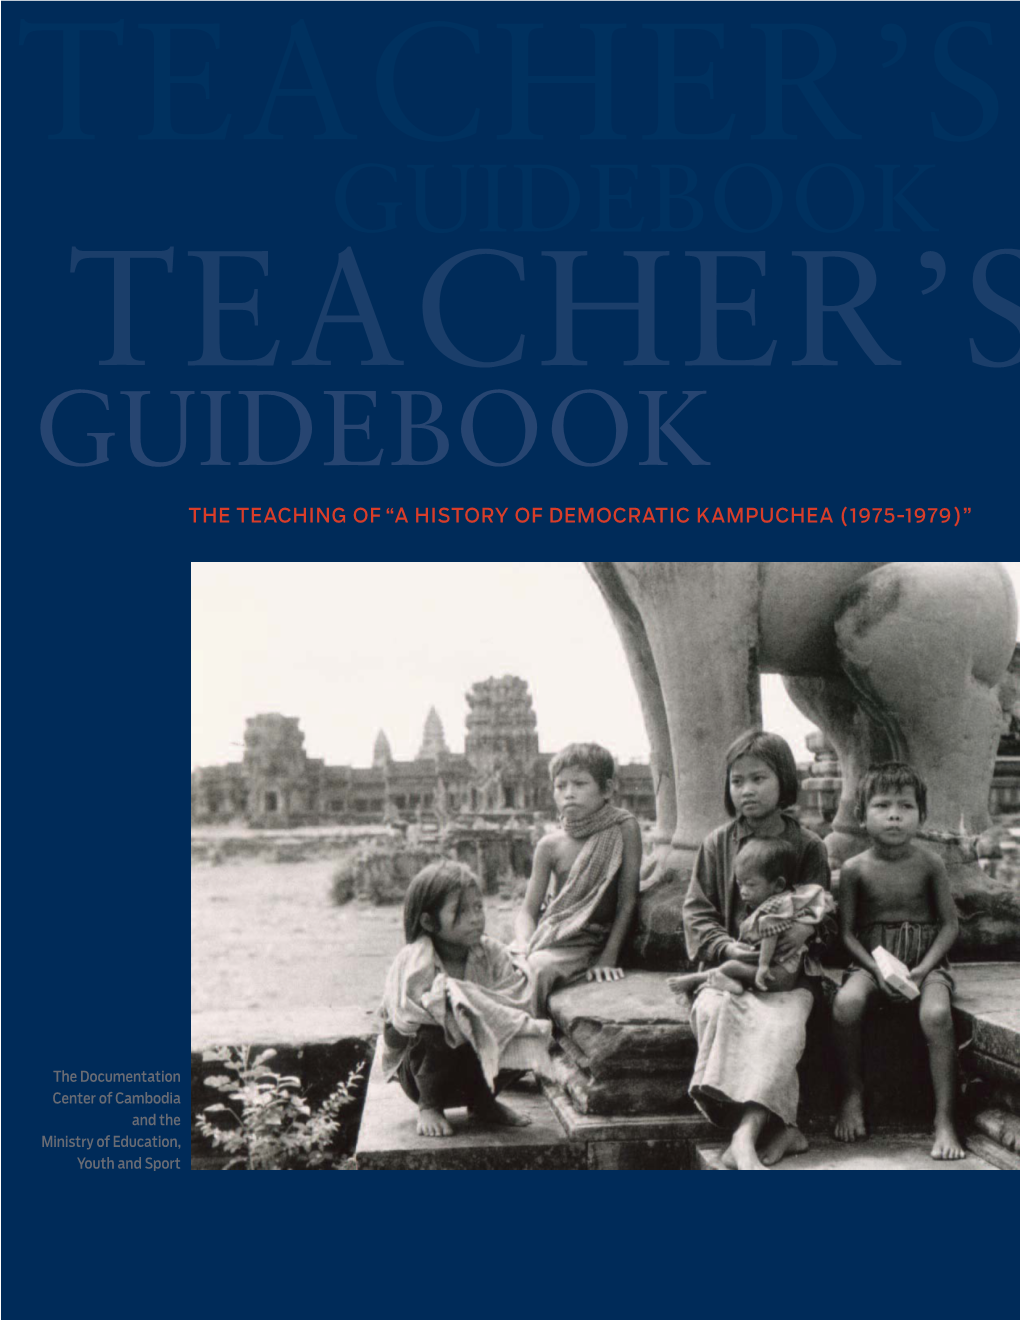 Guidebook Teacher’S Guidebook the Teaching of “A History of Democratic Kampuchea (1975-1979)”